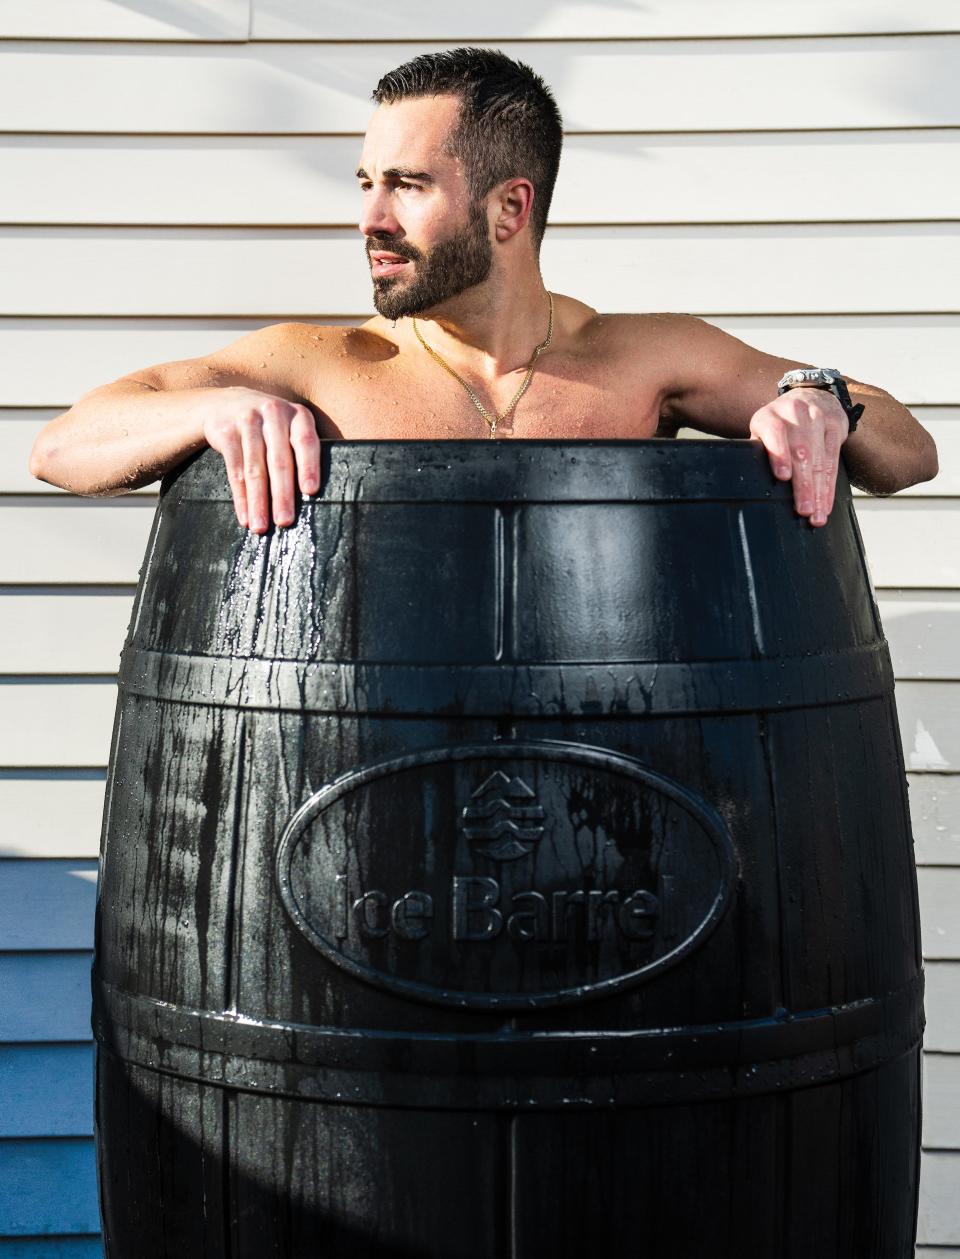 Cold therapy is an essential part of Dr. Tyler Van’s day, either by taking a cold shower or a quick plunge in his outdoor Ice Barrel.